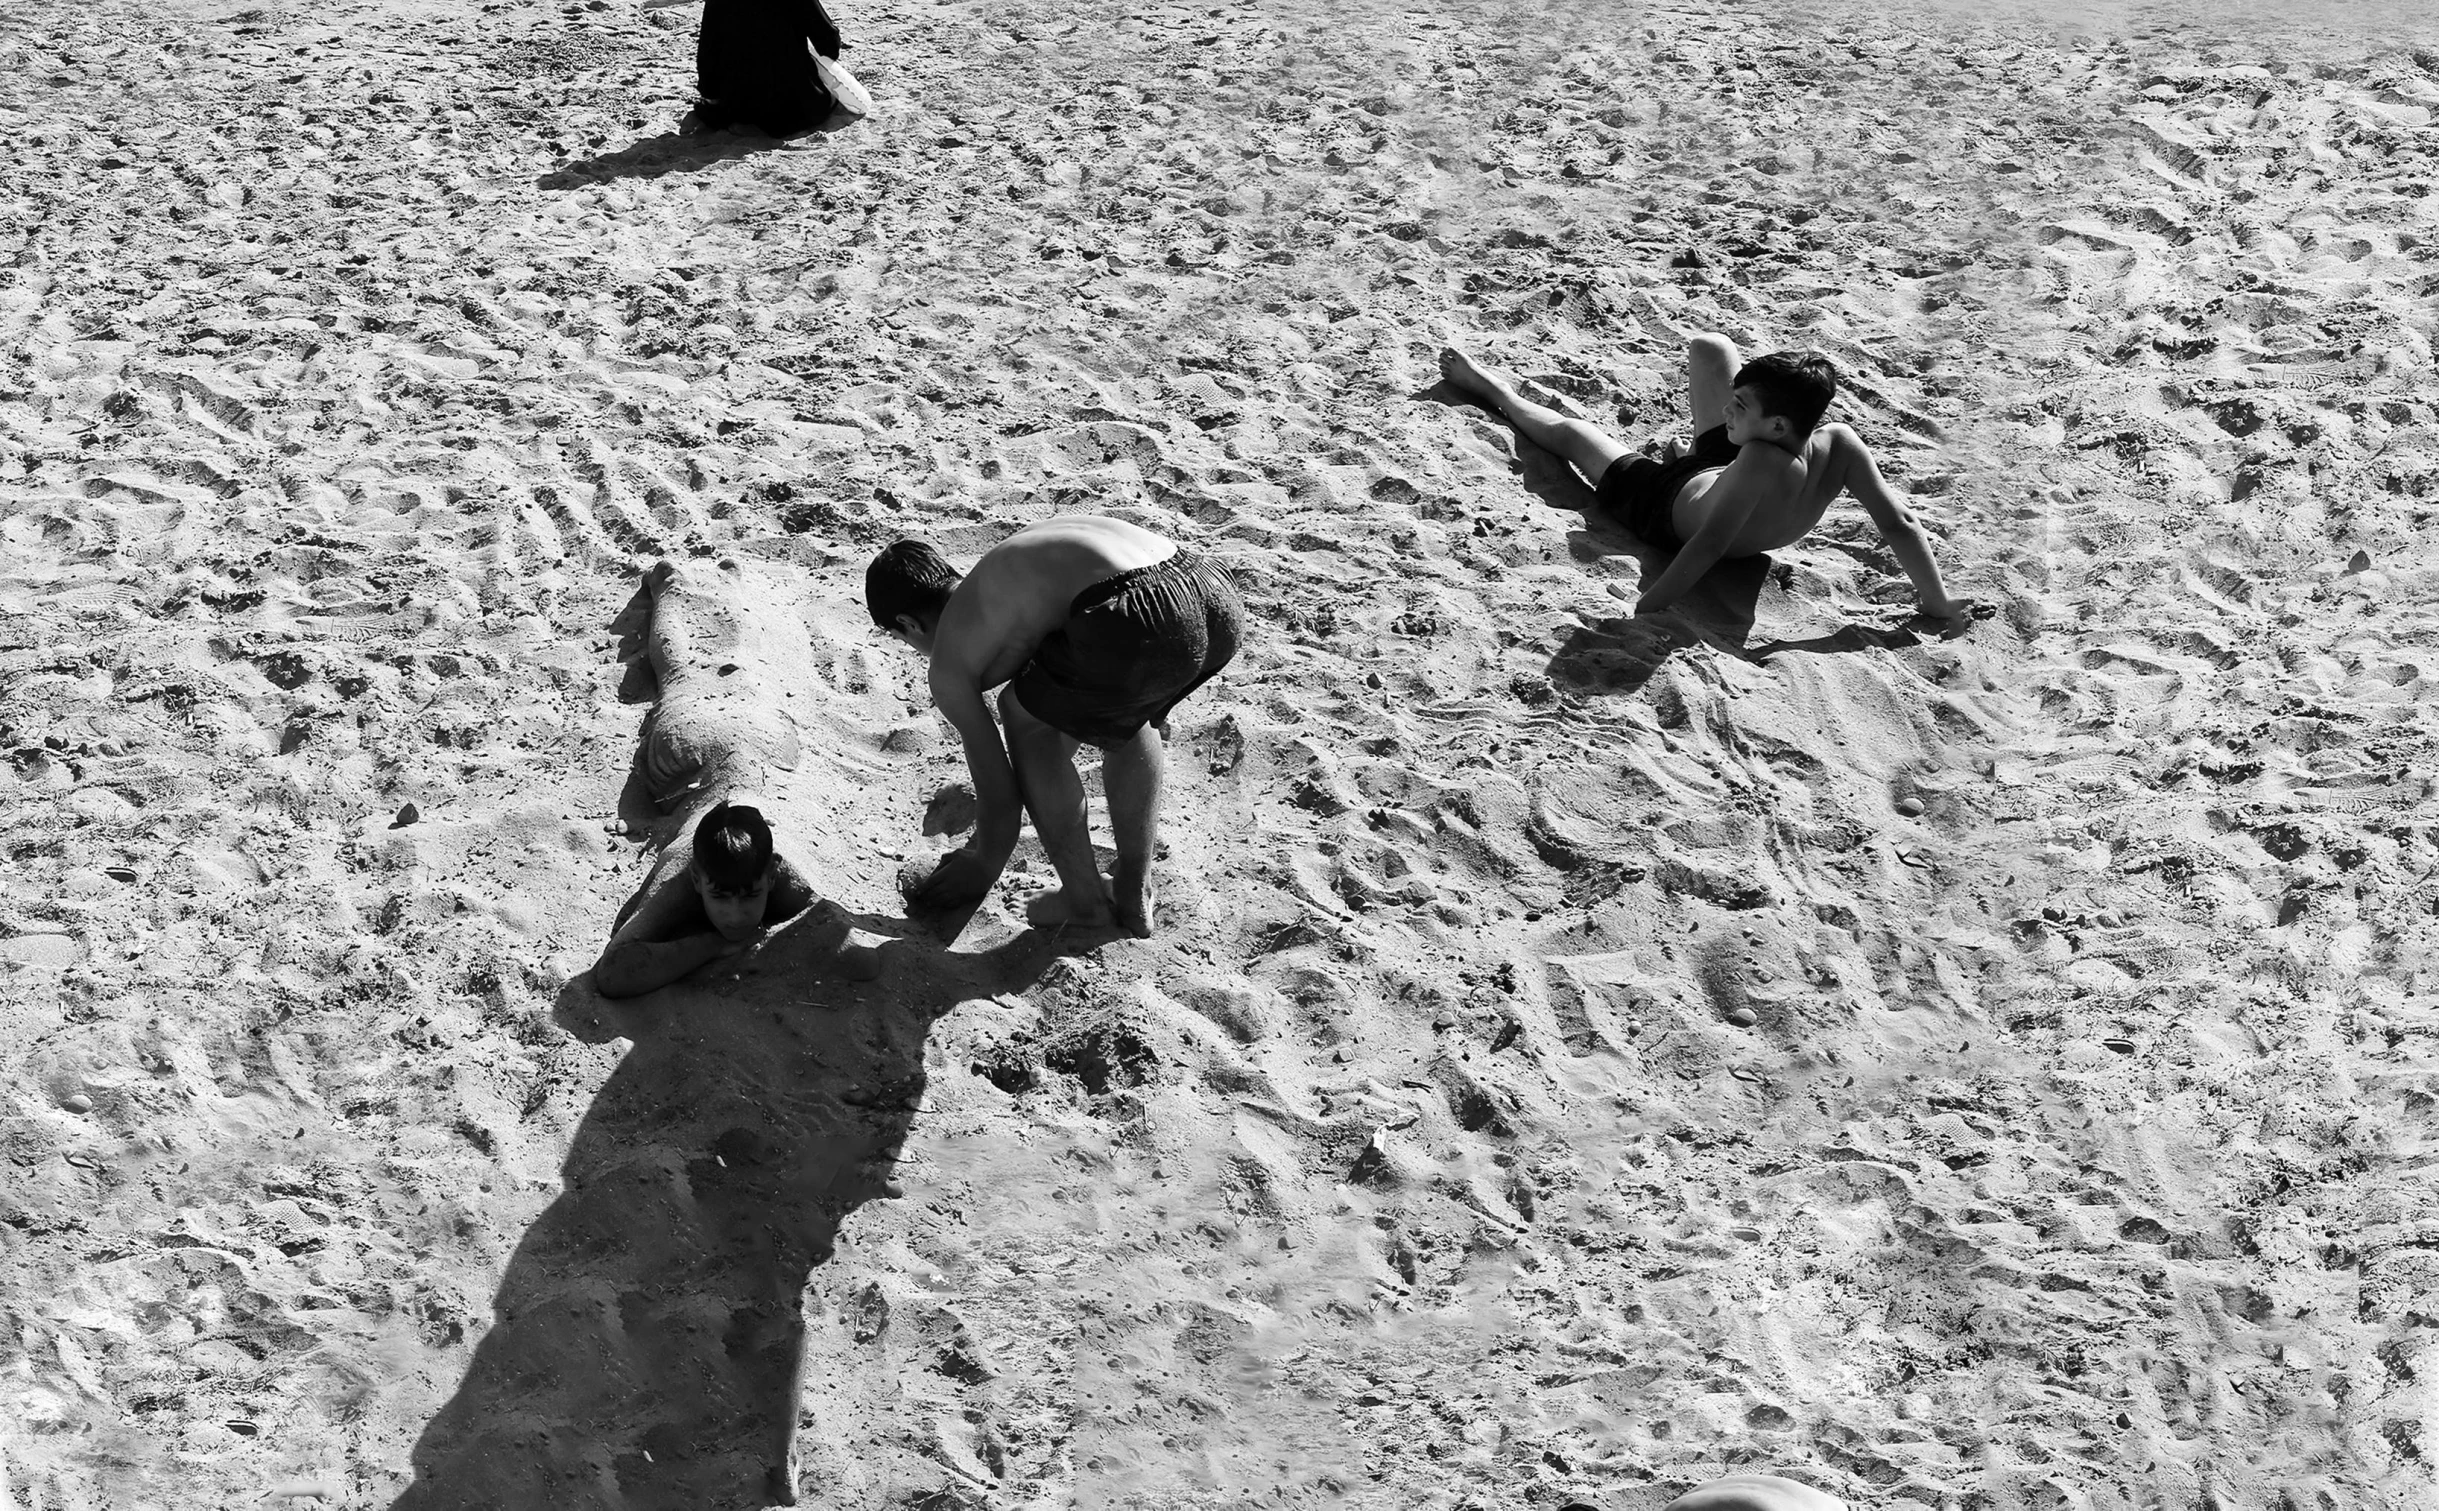 two children play on the beach while a man watches